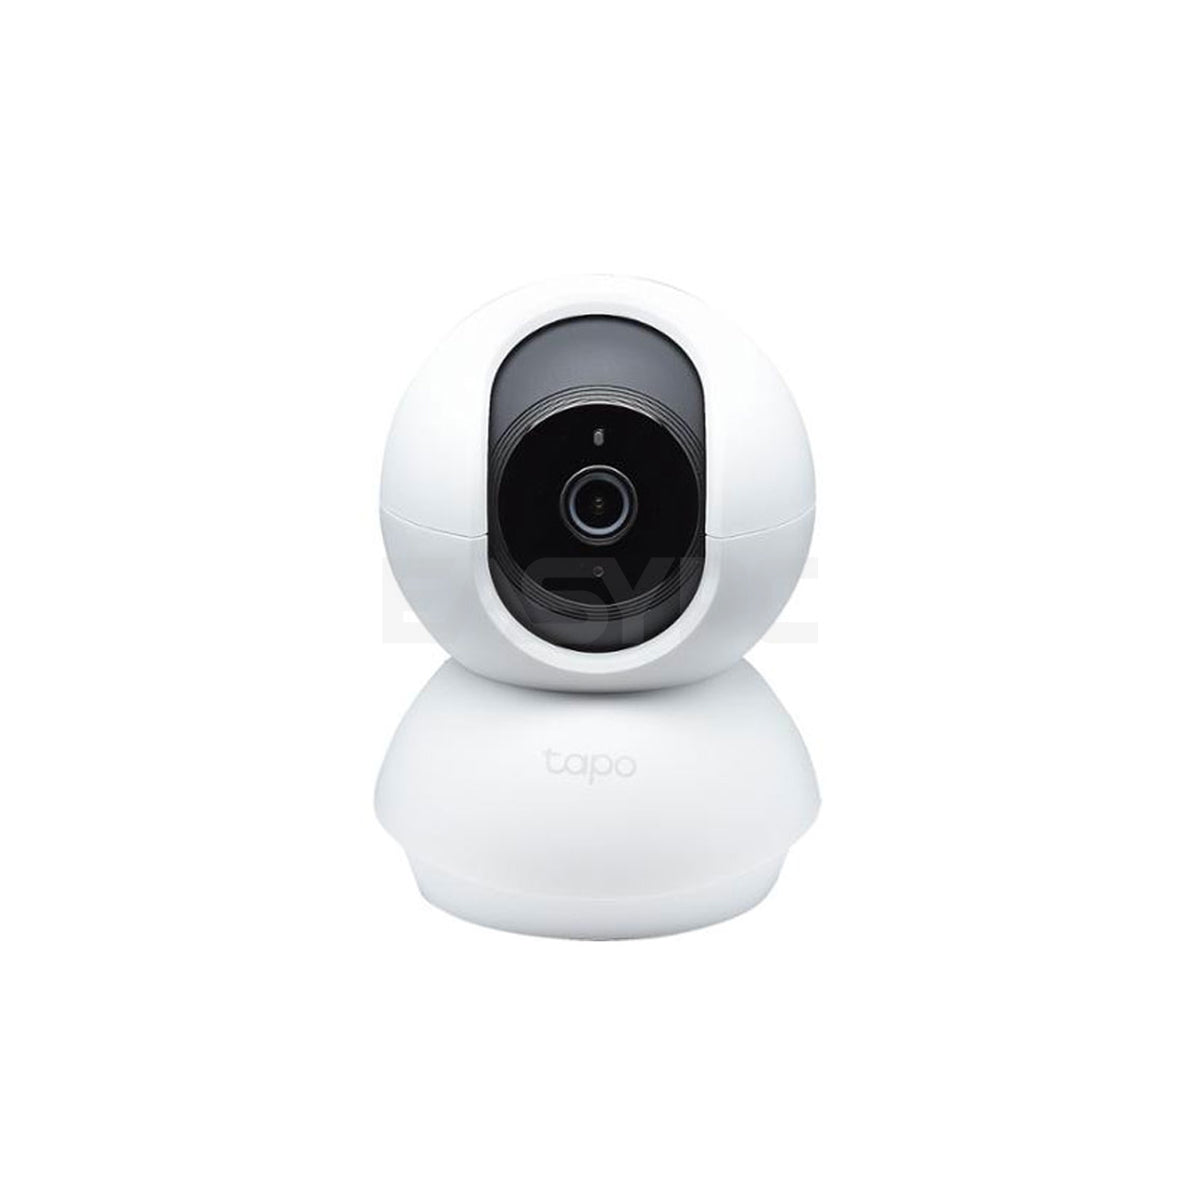 TP-LINK TAPO C200 HOME SECURITY WIFI CAMERA